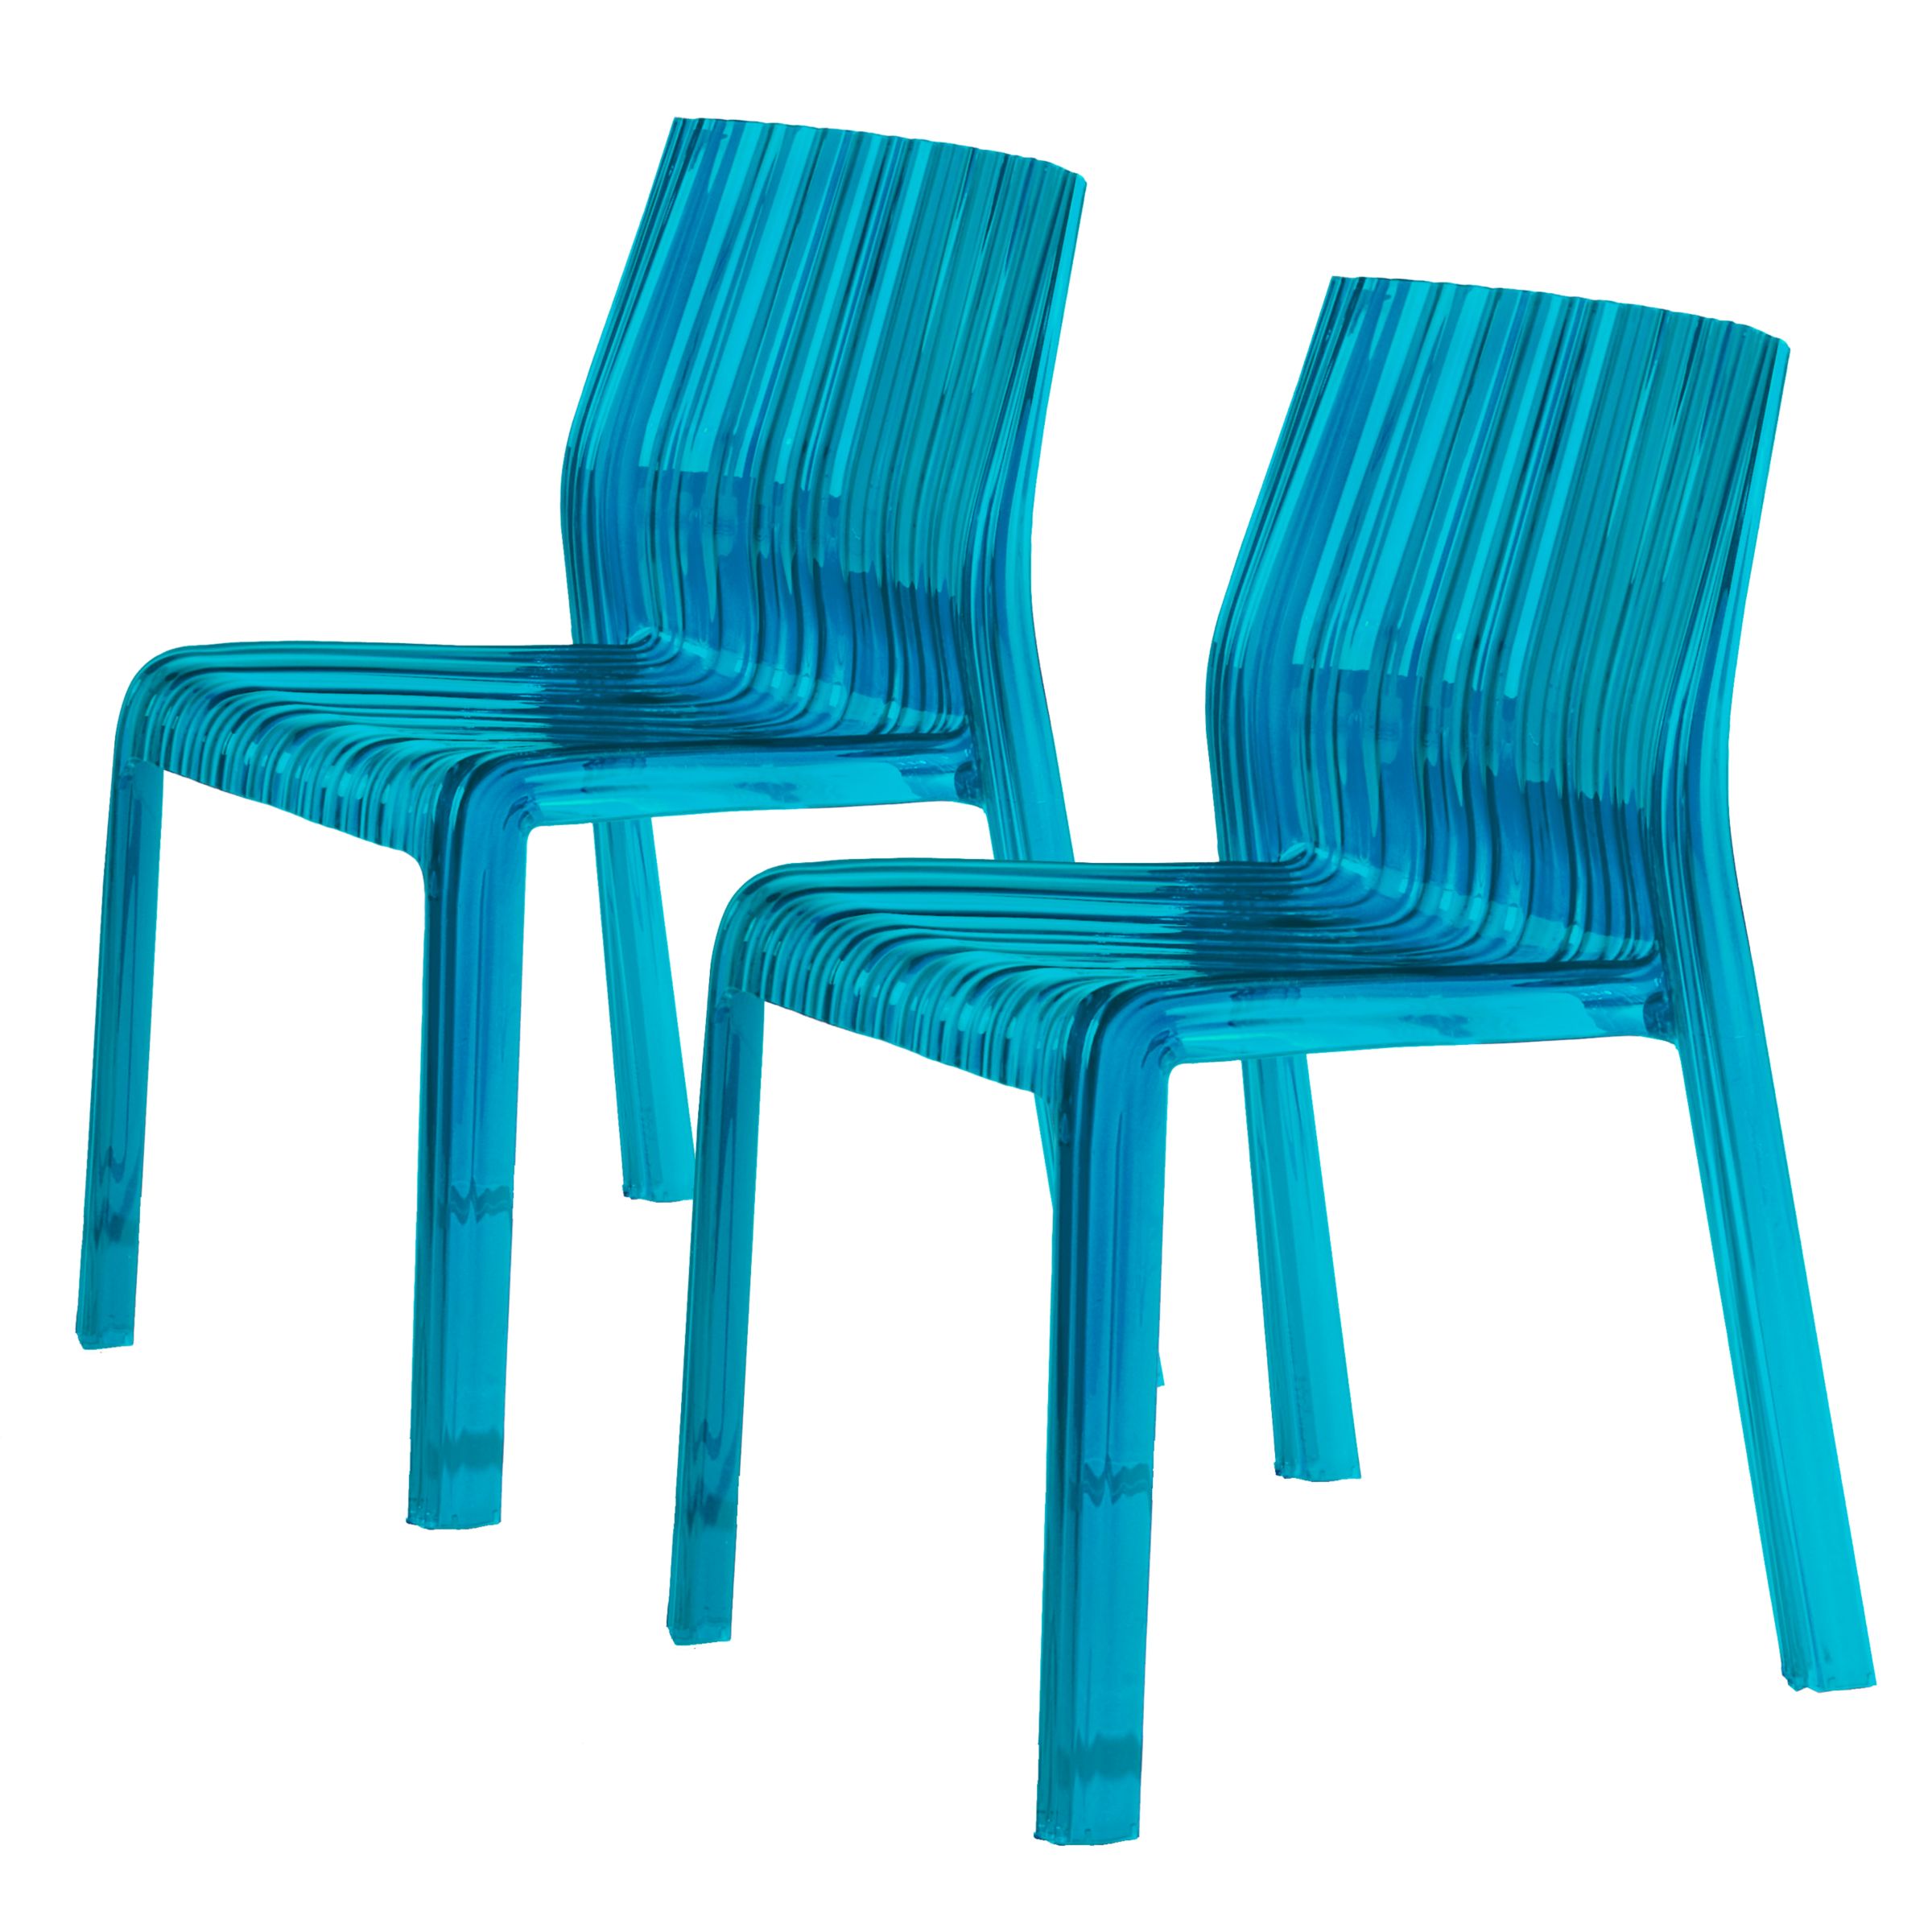 Patricia Urquiola for Kartell Frilly Chair, Turquoise, Pair at John Lewis